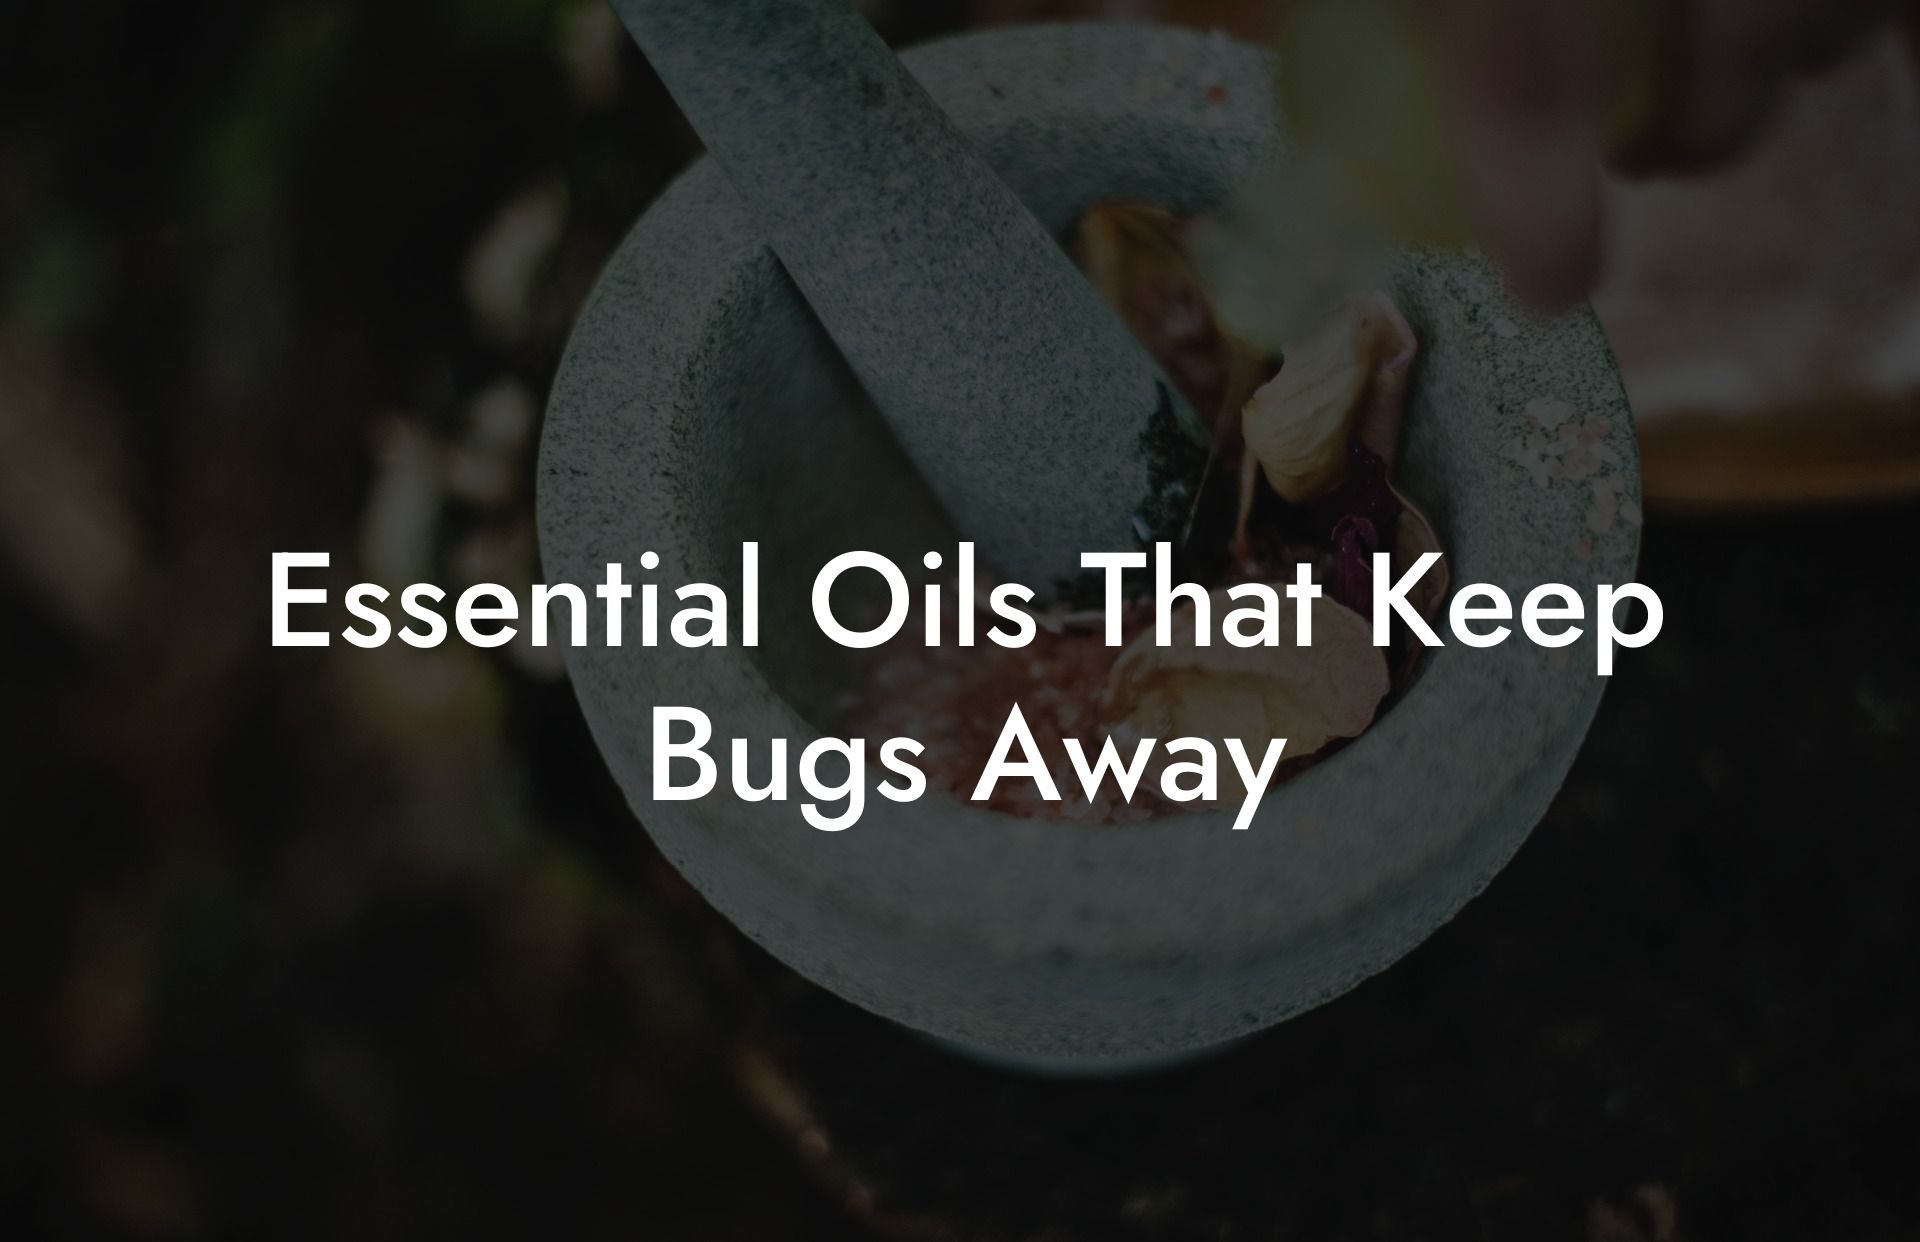 Essential Oils That Keep Bugs Away